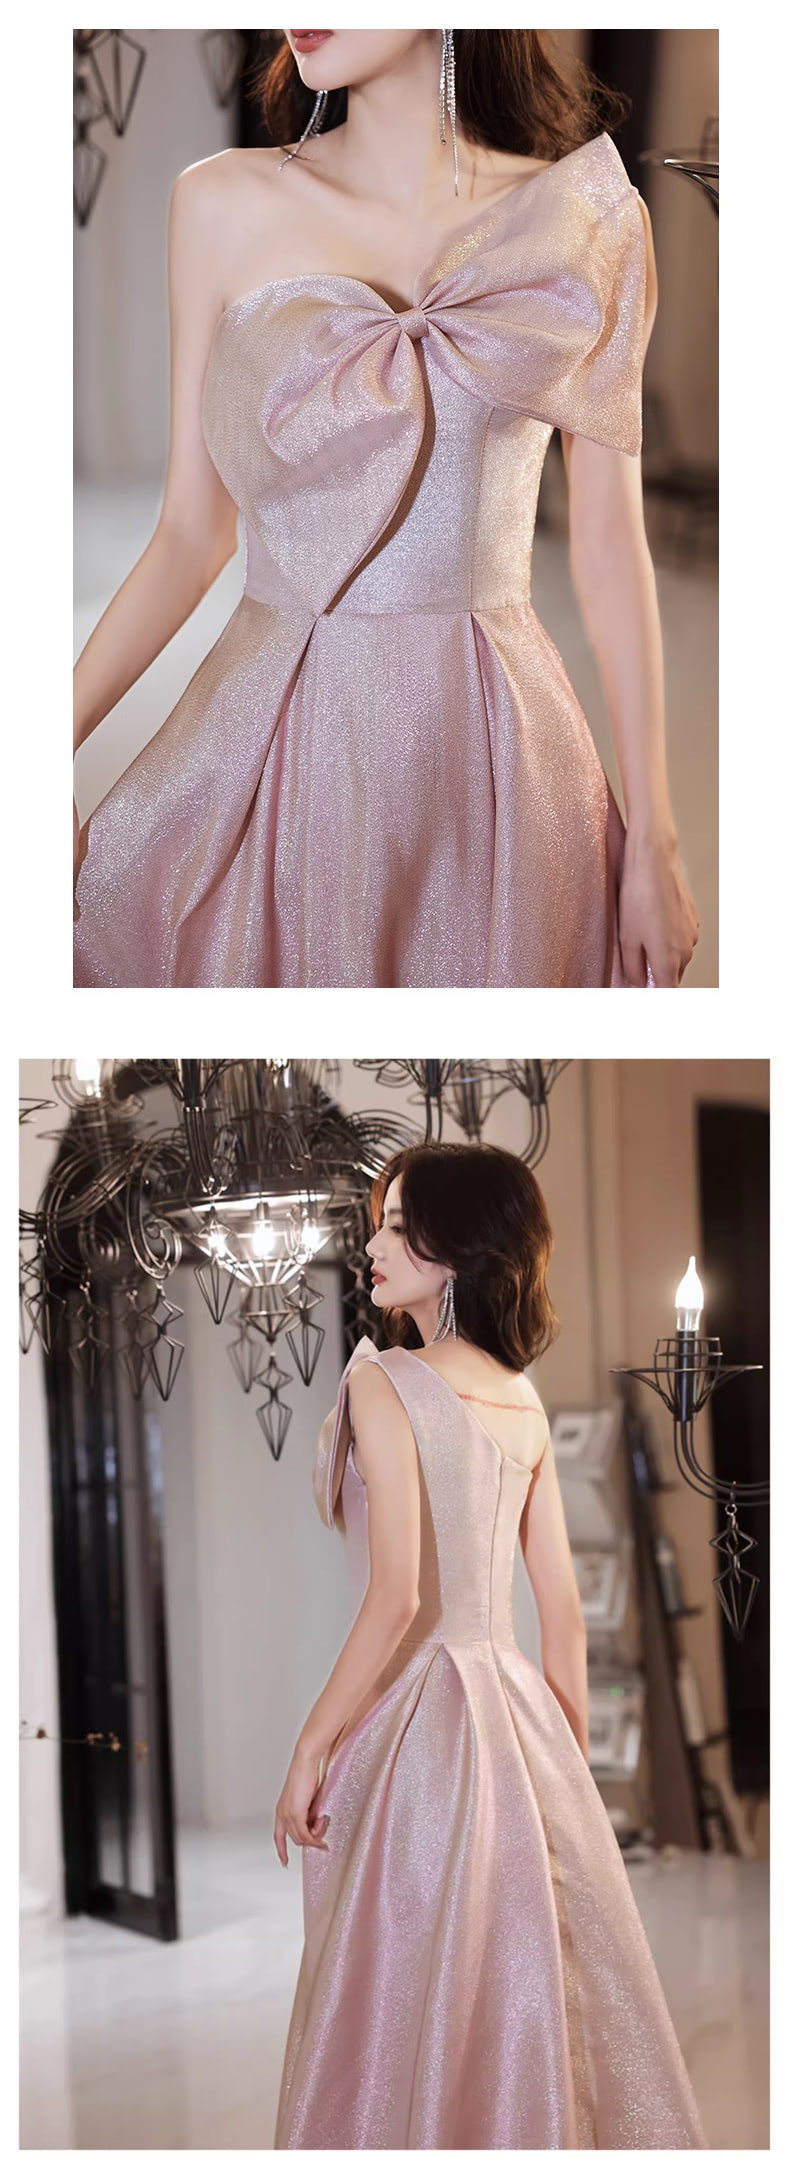 Pink-One-Shoulder-Evening-Dress-Sleeveless-Bow-Cocktail-Party-Gown15